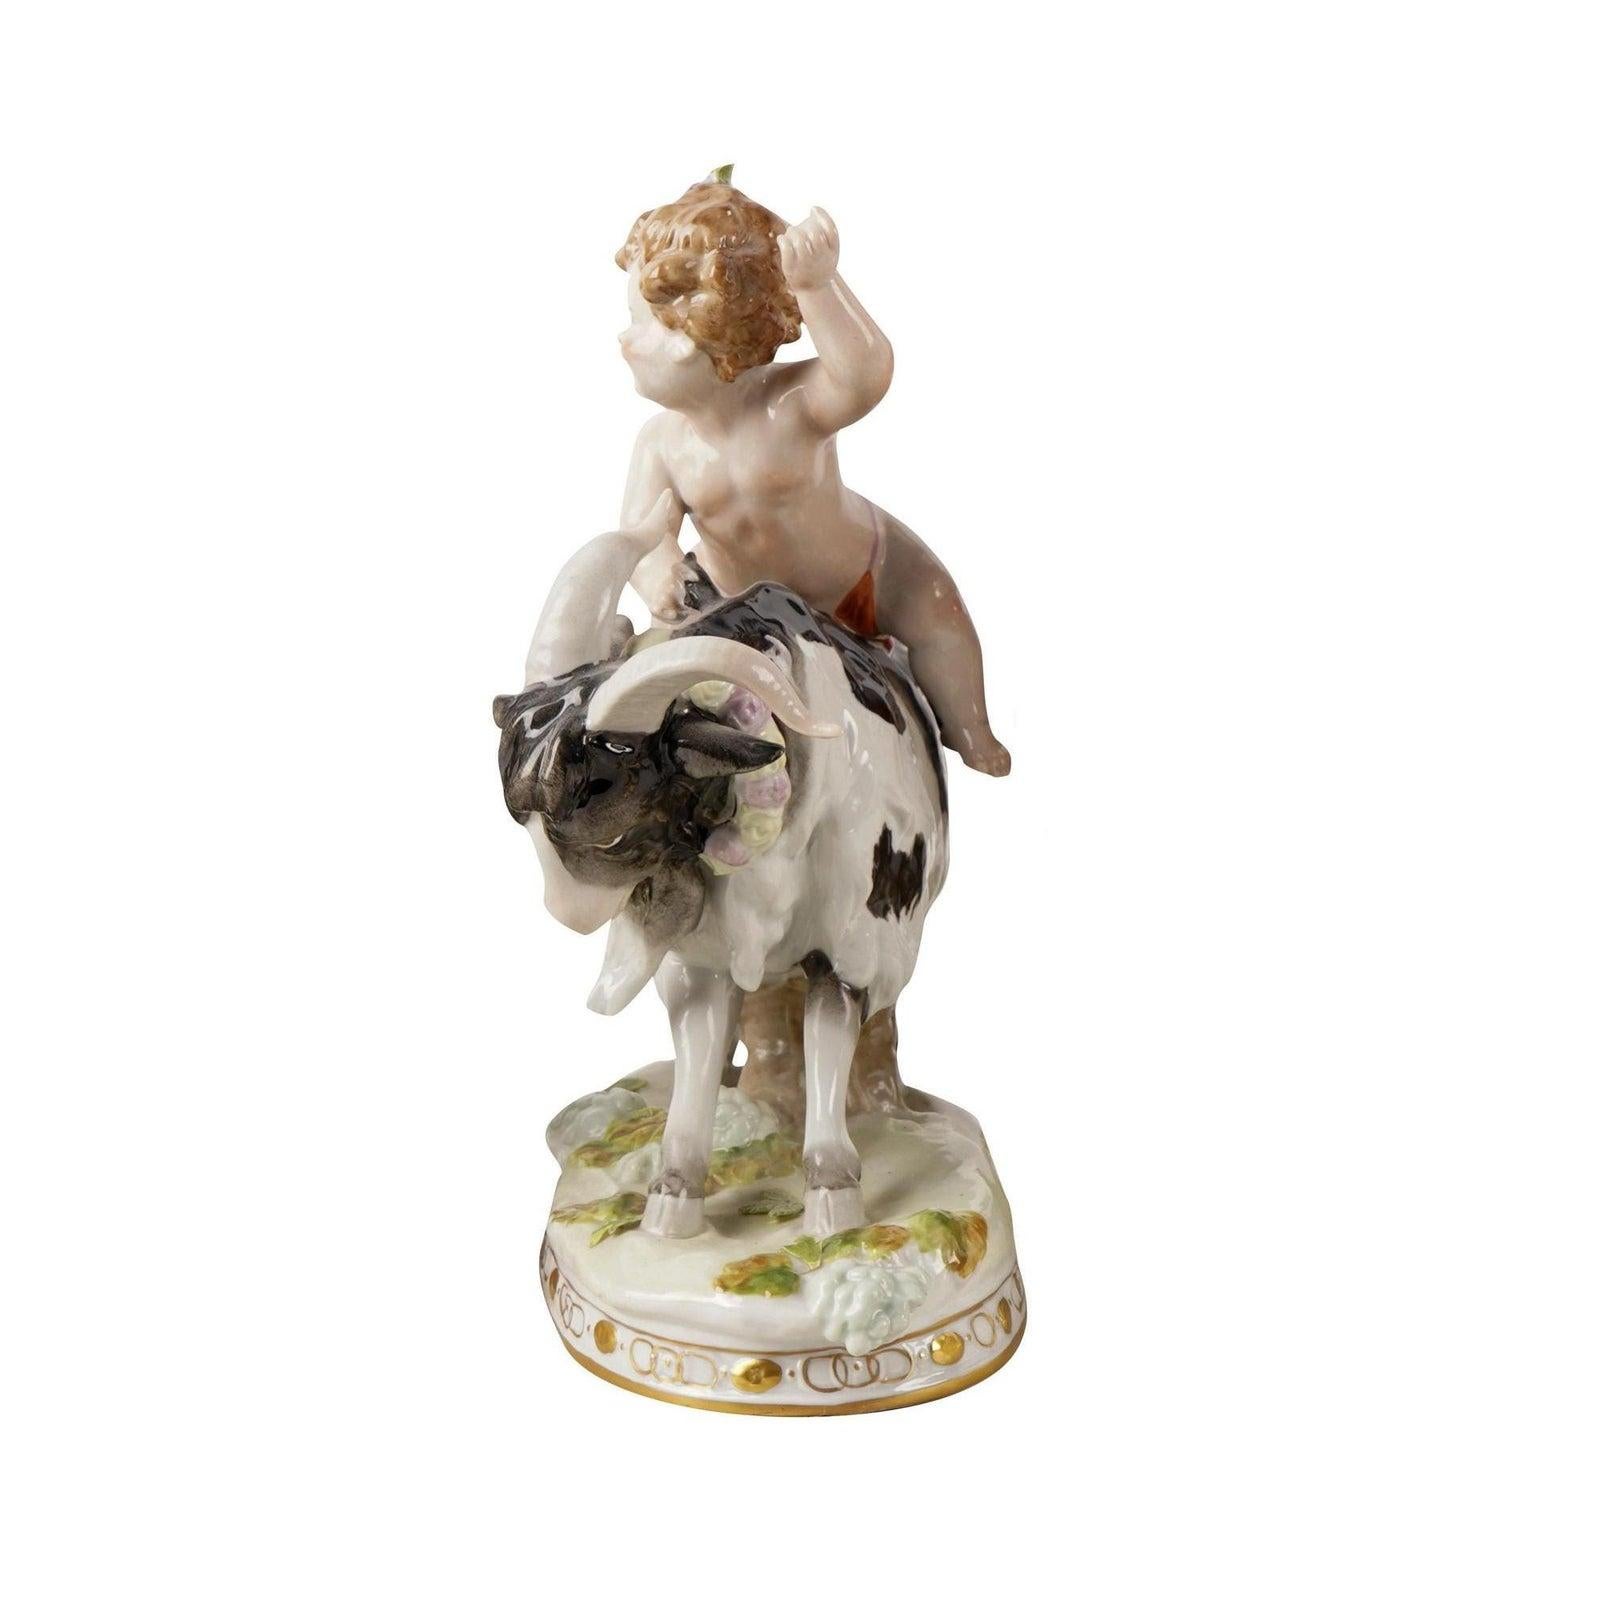 20th Century Scheibe Alsbach Kister Porcelain Nude Putti Riding Thuringian Goat Figurine For Sale